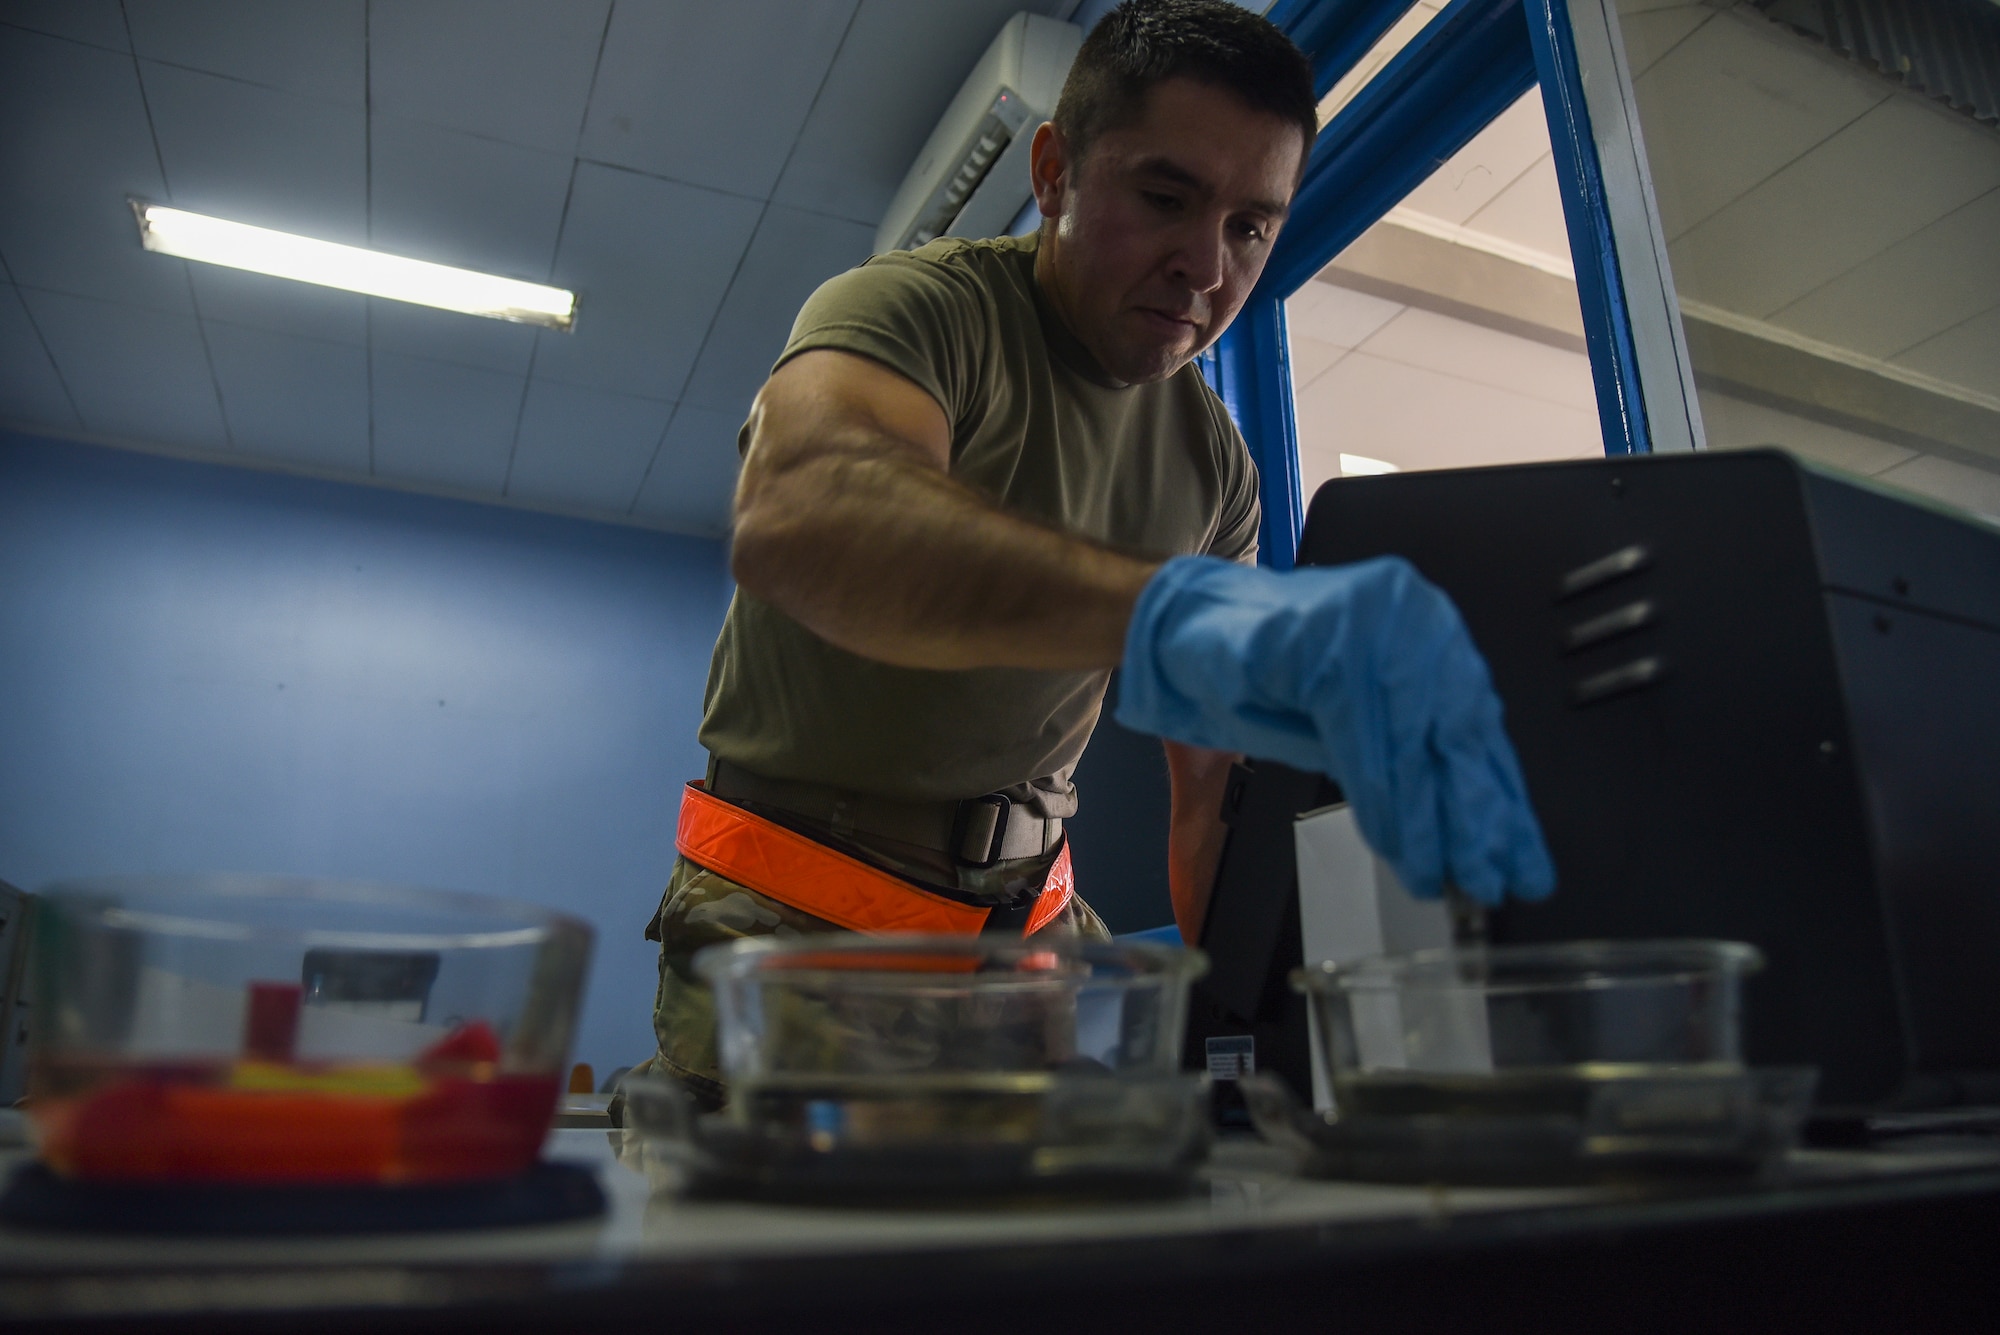 U.S. Air Force Staff Sgt. Daniel Lara, 8th Maintenance Squadron non-destructive inspection craftsman, cleans a magnetic chip detector in an alcohol solution at Roesmin Nurjadin Air Force Base, Indonesia, June 15, 2023. As an NDI craftsman, Lara used a detection machine to ensure foreign materials have not found their way into the engine oil of the F-16s being flown at Cope West 23 as a way of preventative maintenance. (U.S. Air Force photo by Tech. Sgt. Timothy Moore)